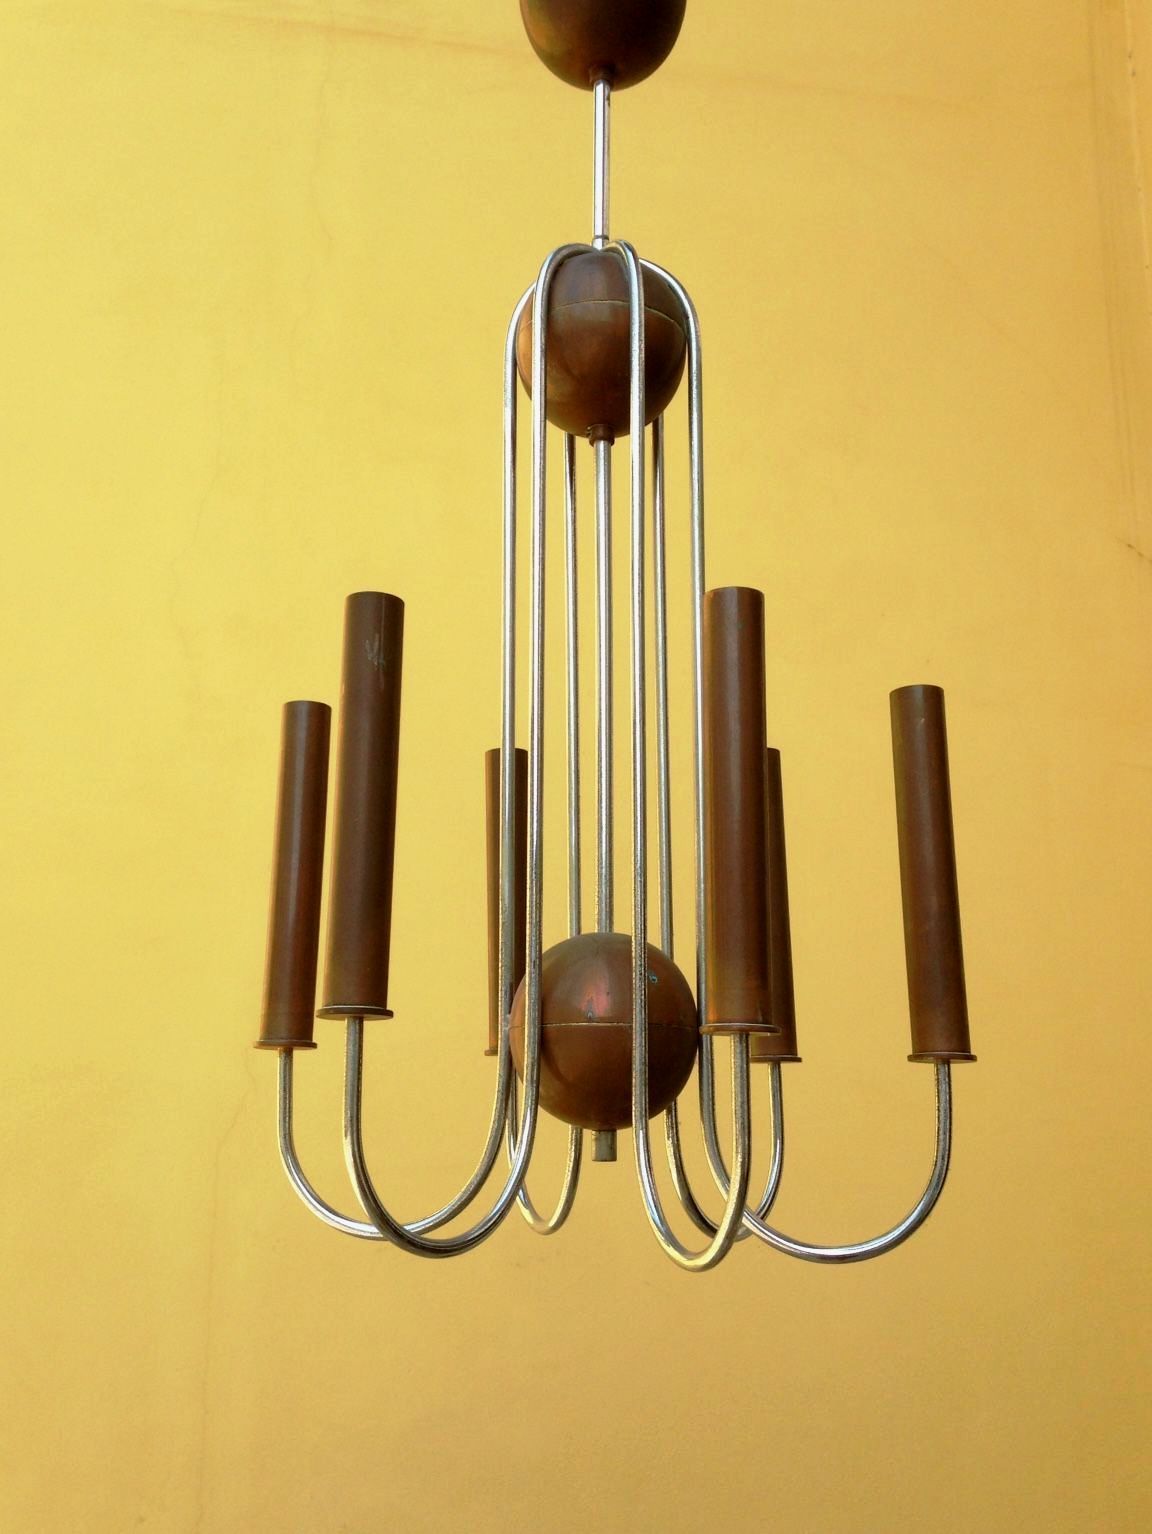 1930s Rationalist Ceiling Light In Excellent Condition For Sale In London, GB